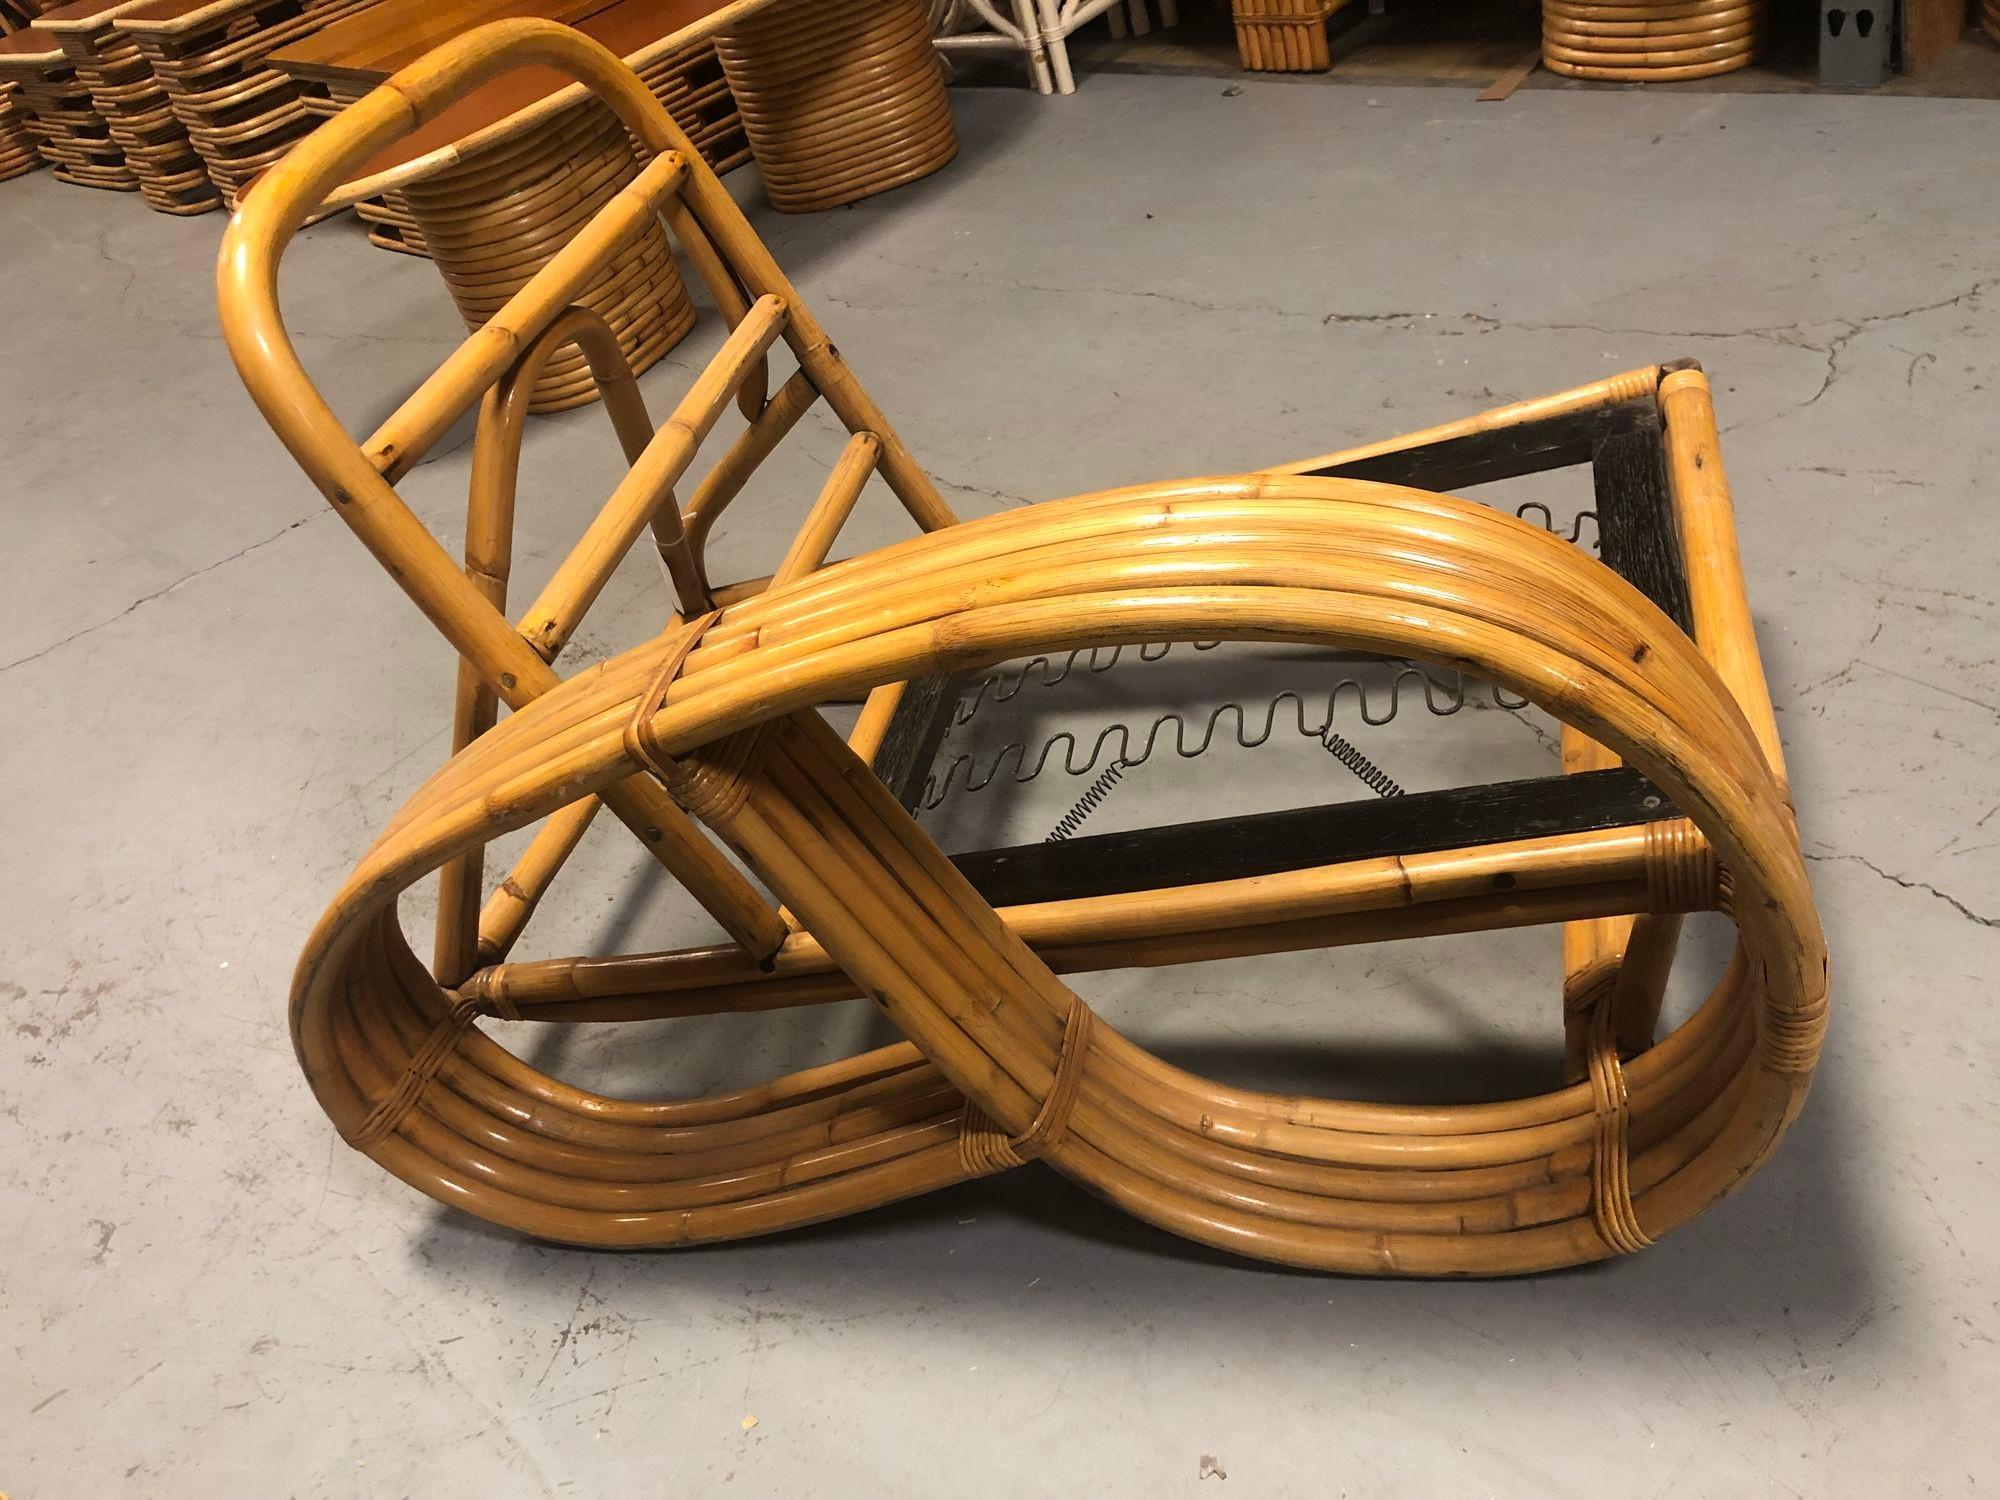 This is a unique one-of-a-kind lounge chair and accent chair featuring a substantial five-strand 3/4 reverse pretzel right arm. This piece stands alone as an eclectic addition to your unique seating area.

Restored to new for you.

We only purchase